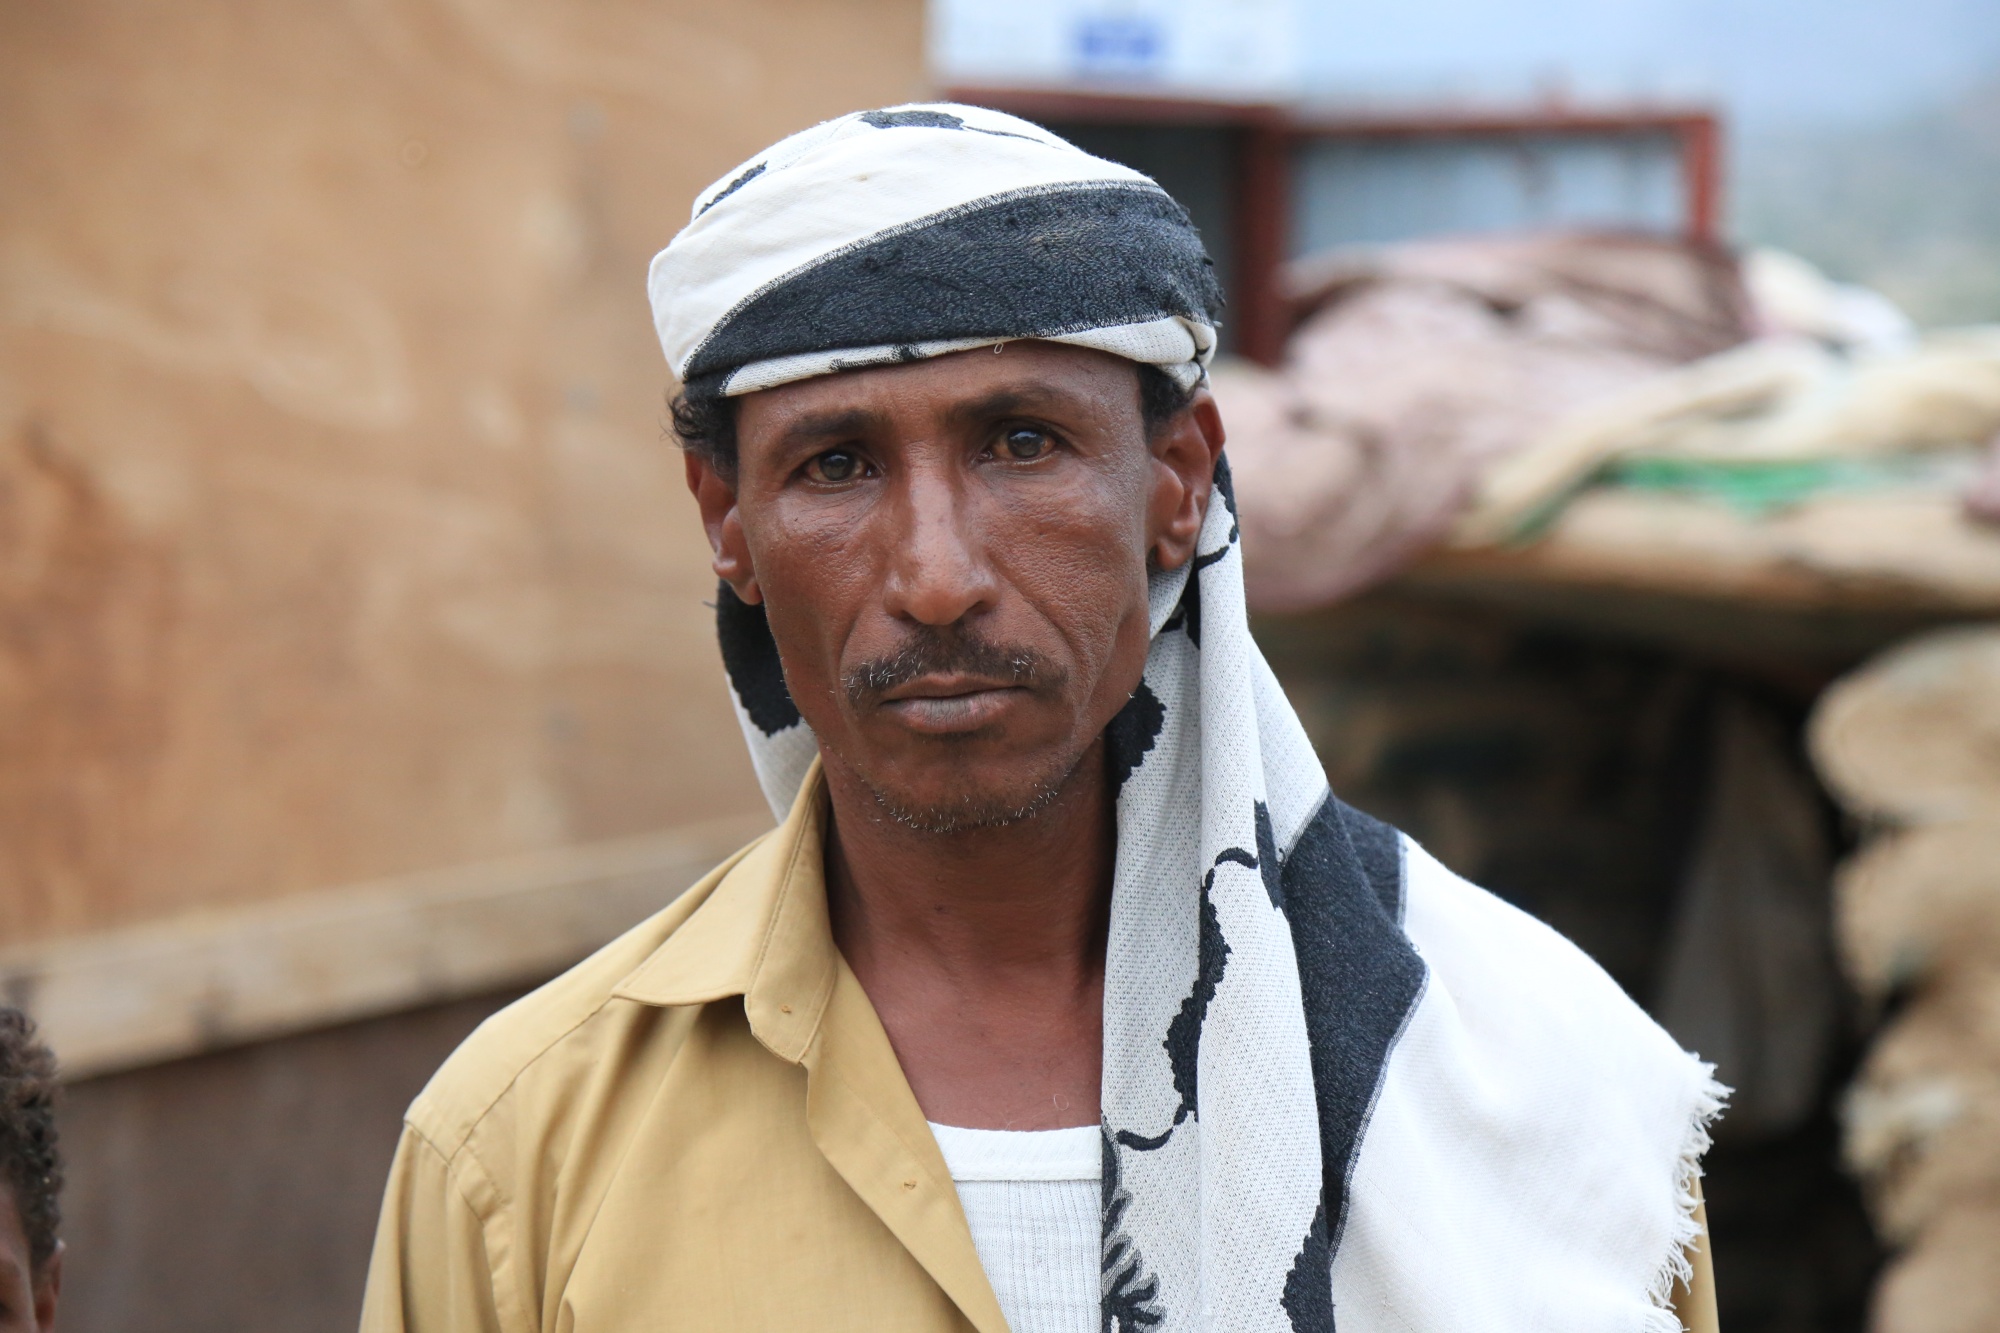 Abdulwase Sufian says he lost everything when the war in Yemen forces him and his family to flee their village (MEE/Khalid al-Banna)